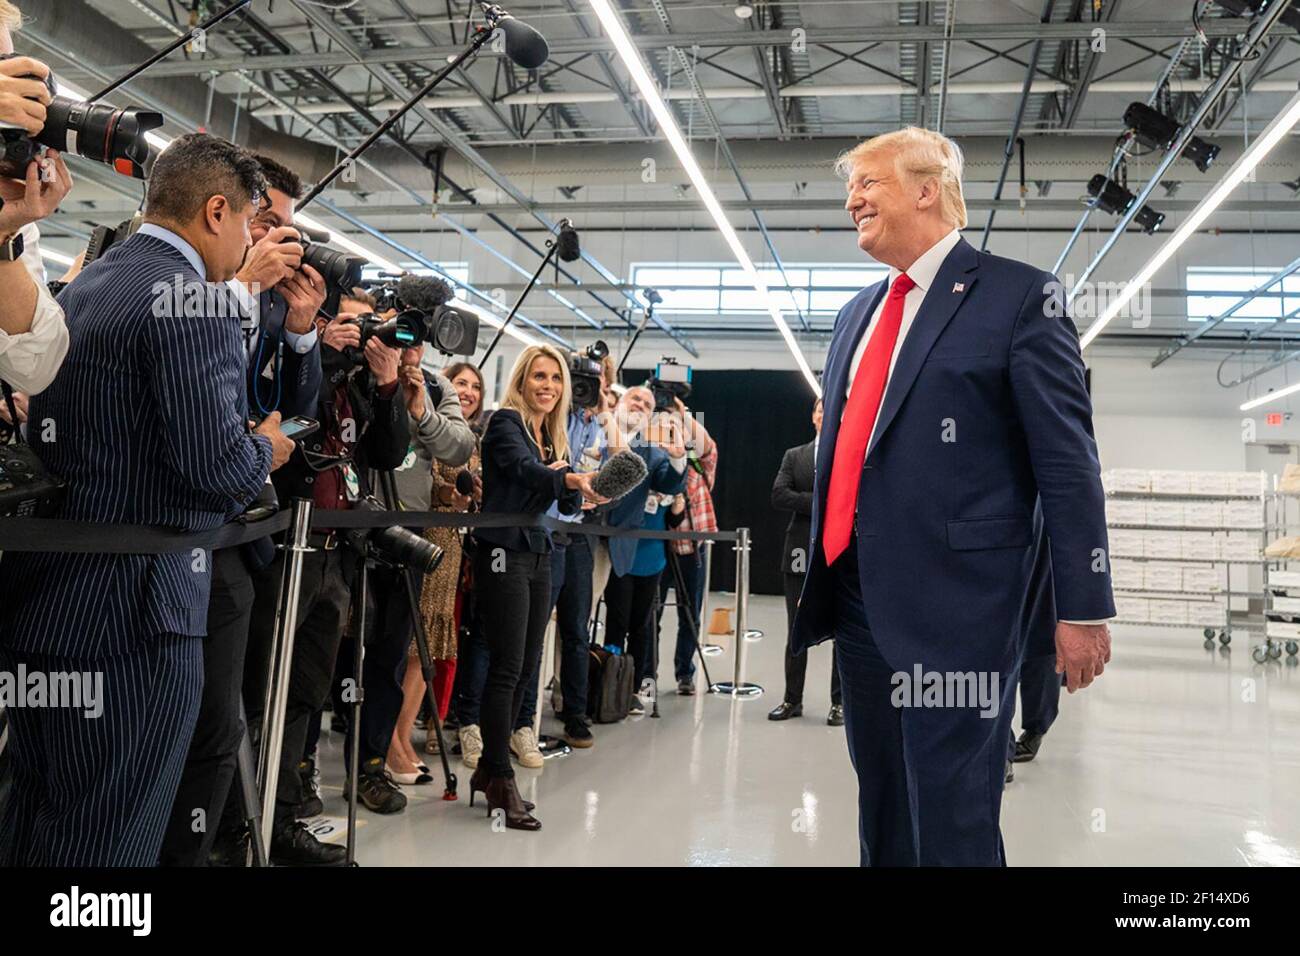 President Trump at the Opening of a Texas Louis Vuitton Workshop